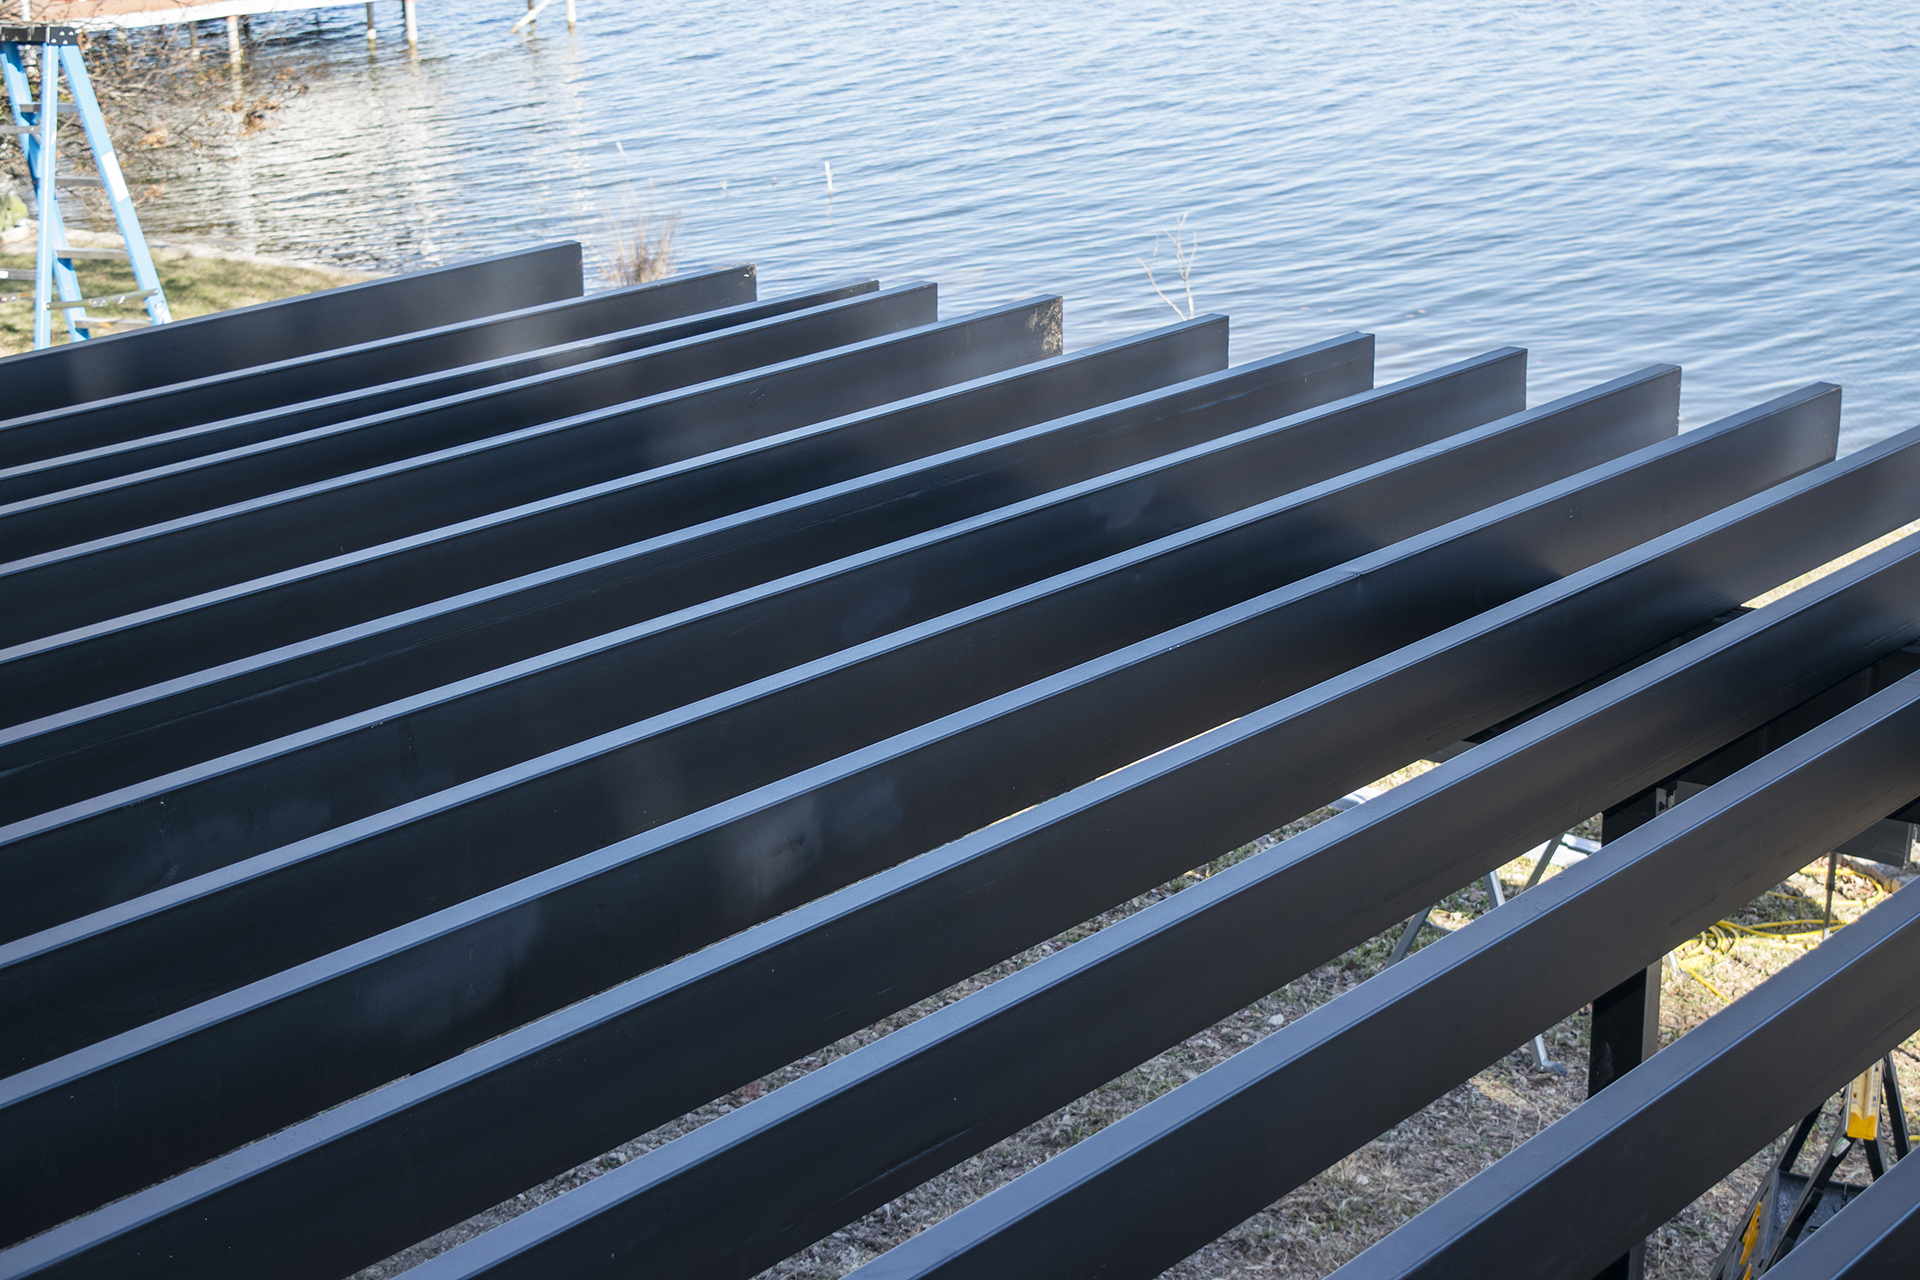 Steel deck framing next to a body of water.